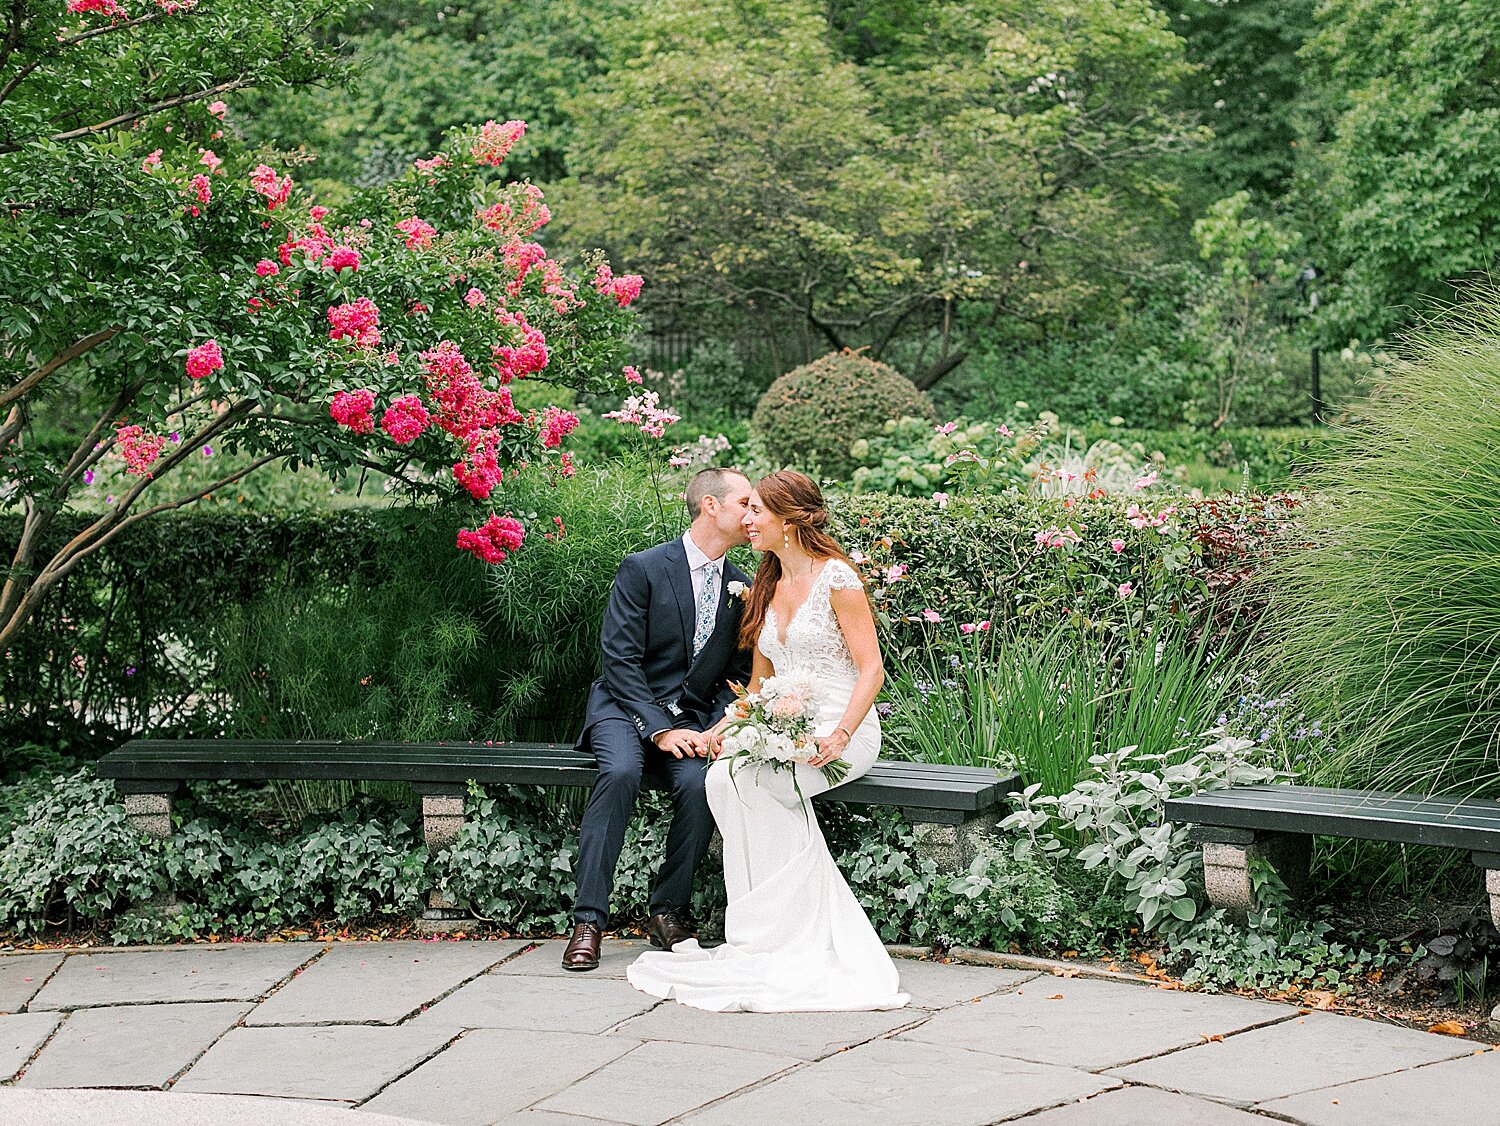 bride and groom sit on bench in Central Park | Asher Gardner Photography | Elopement at the Central Park Conservatory Gardens